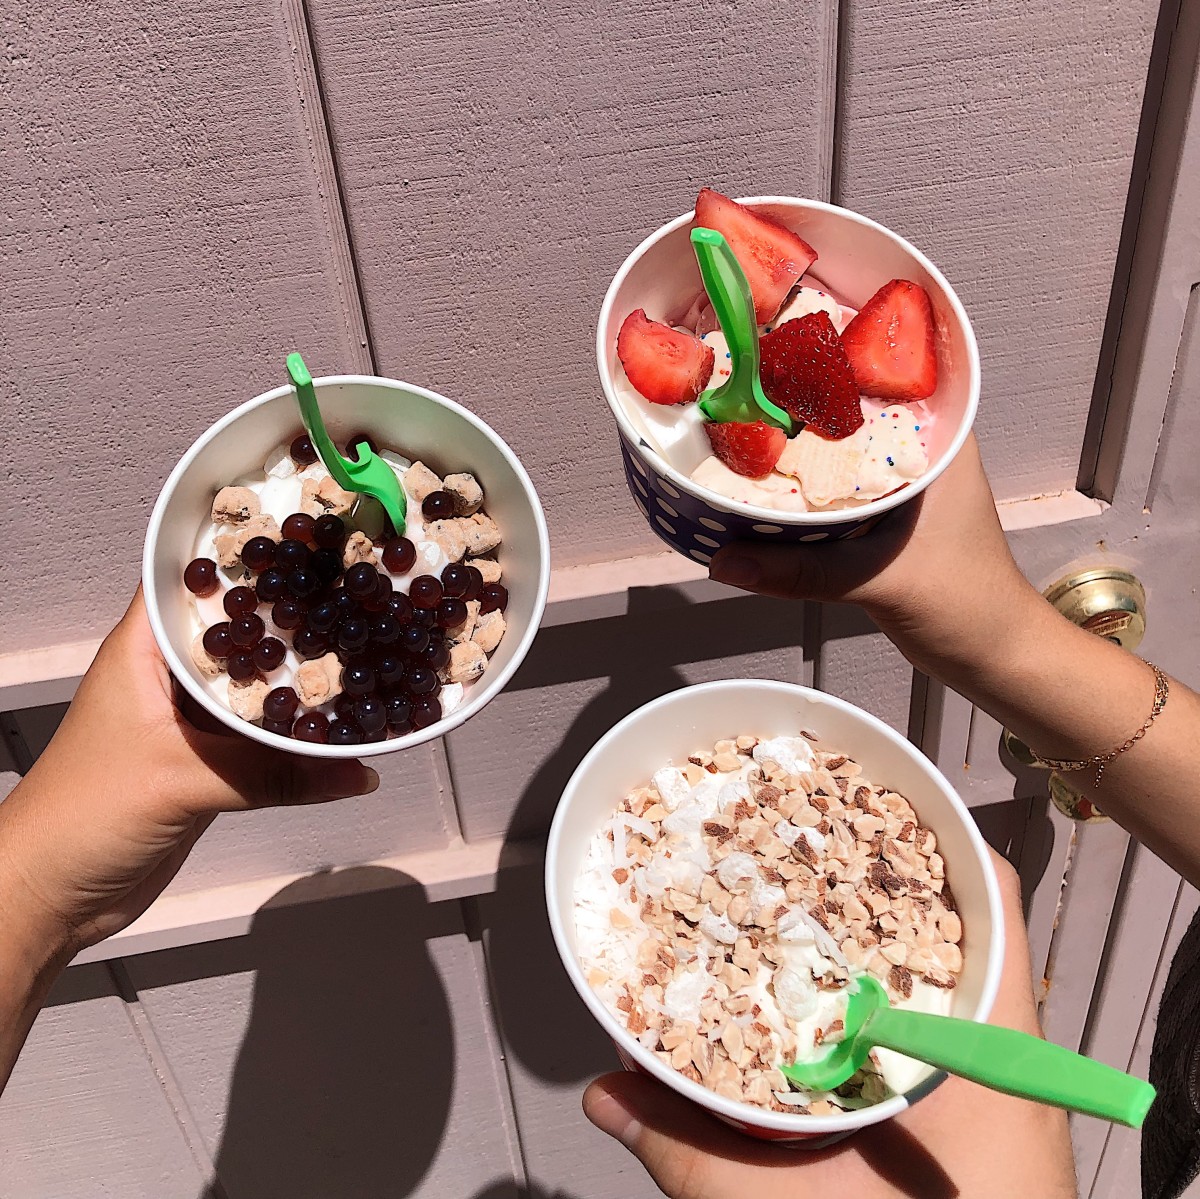 Our little trio clearly has very different taste in toppings.